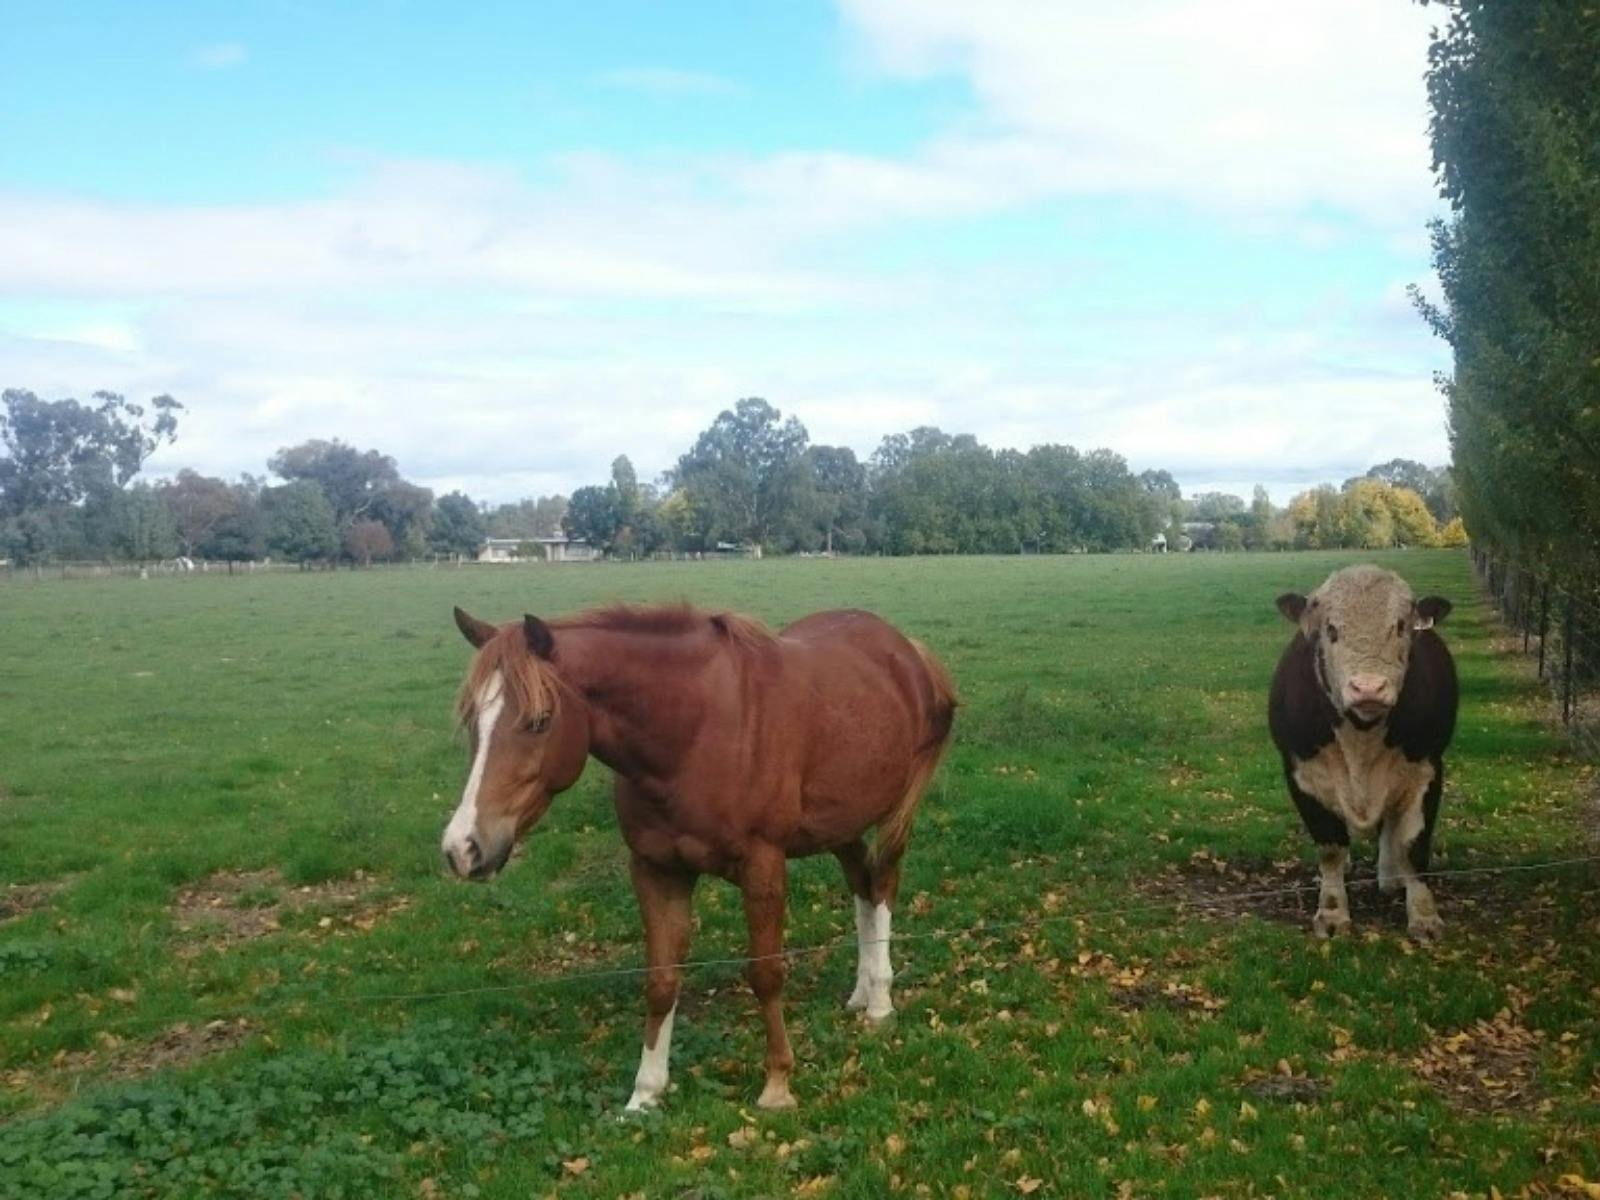 One horse and one cow, green grass, trees, houses in distance, blue sky and clouds.